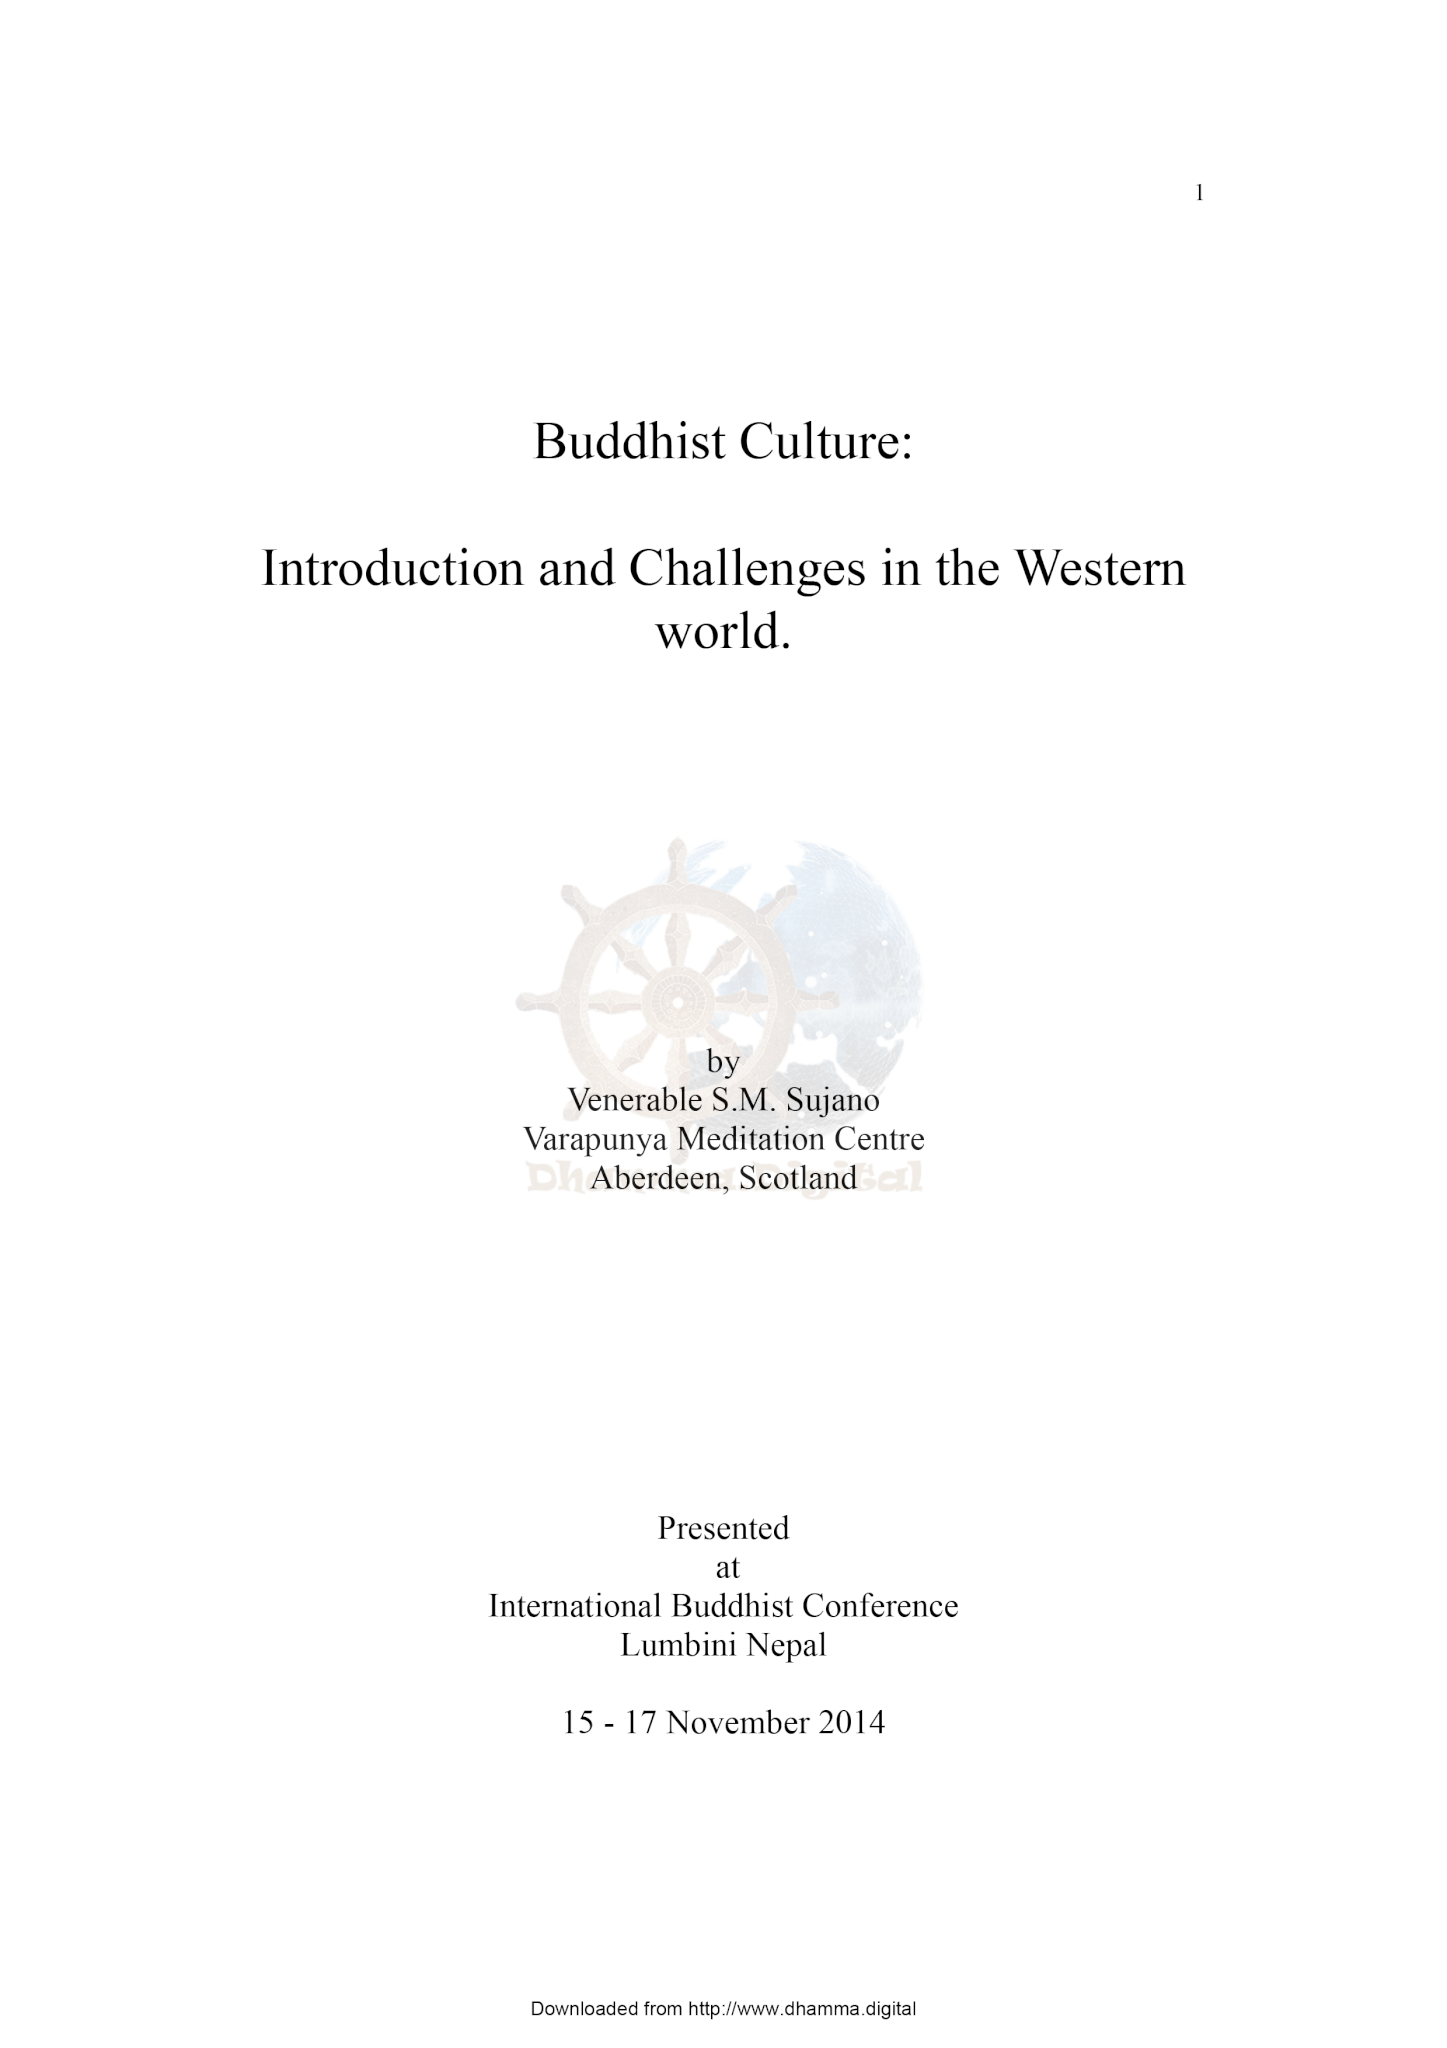 Buddhist Culture: Introduction and Challenges in the Western world